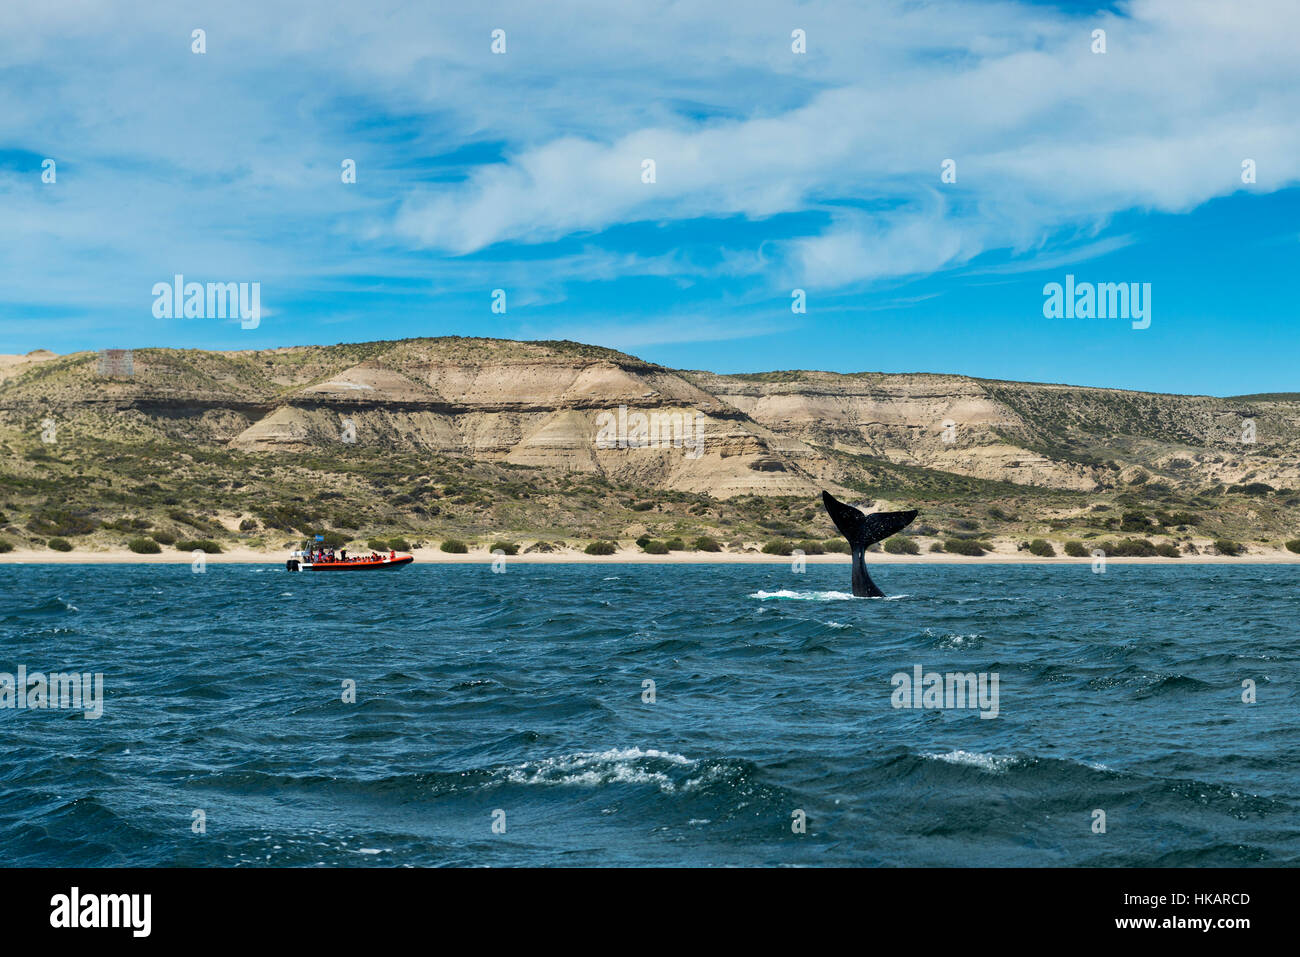 Southern Right Whale flipping its tale in the Valdes Peninsula in Argentina; Concept for travel in Argentina and Whale Watching Stock Photo